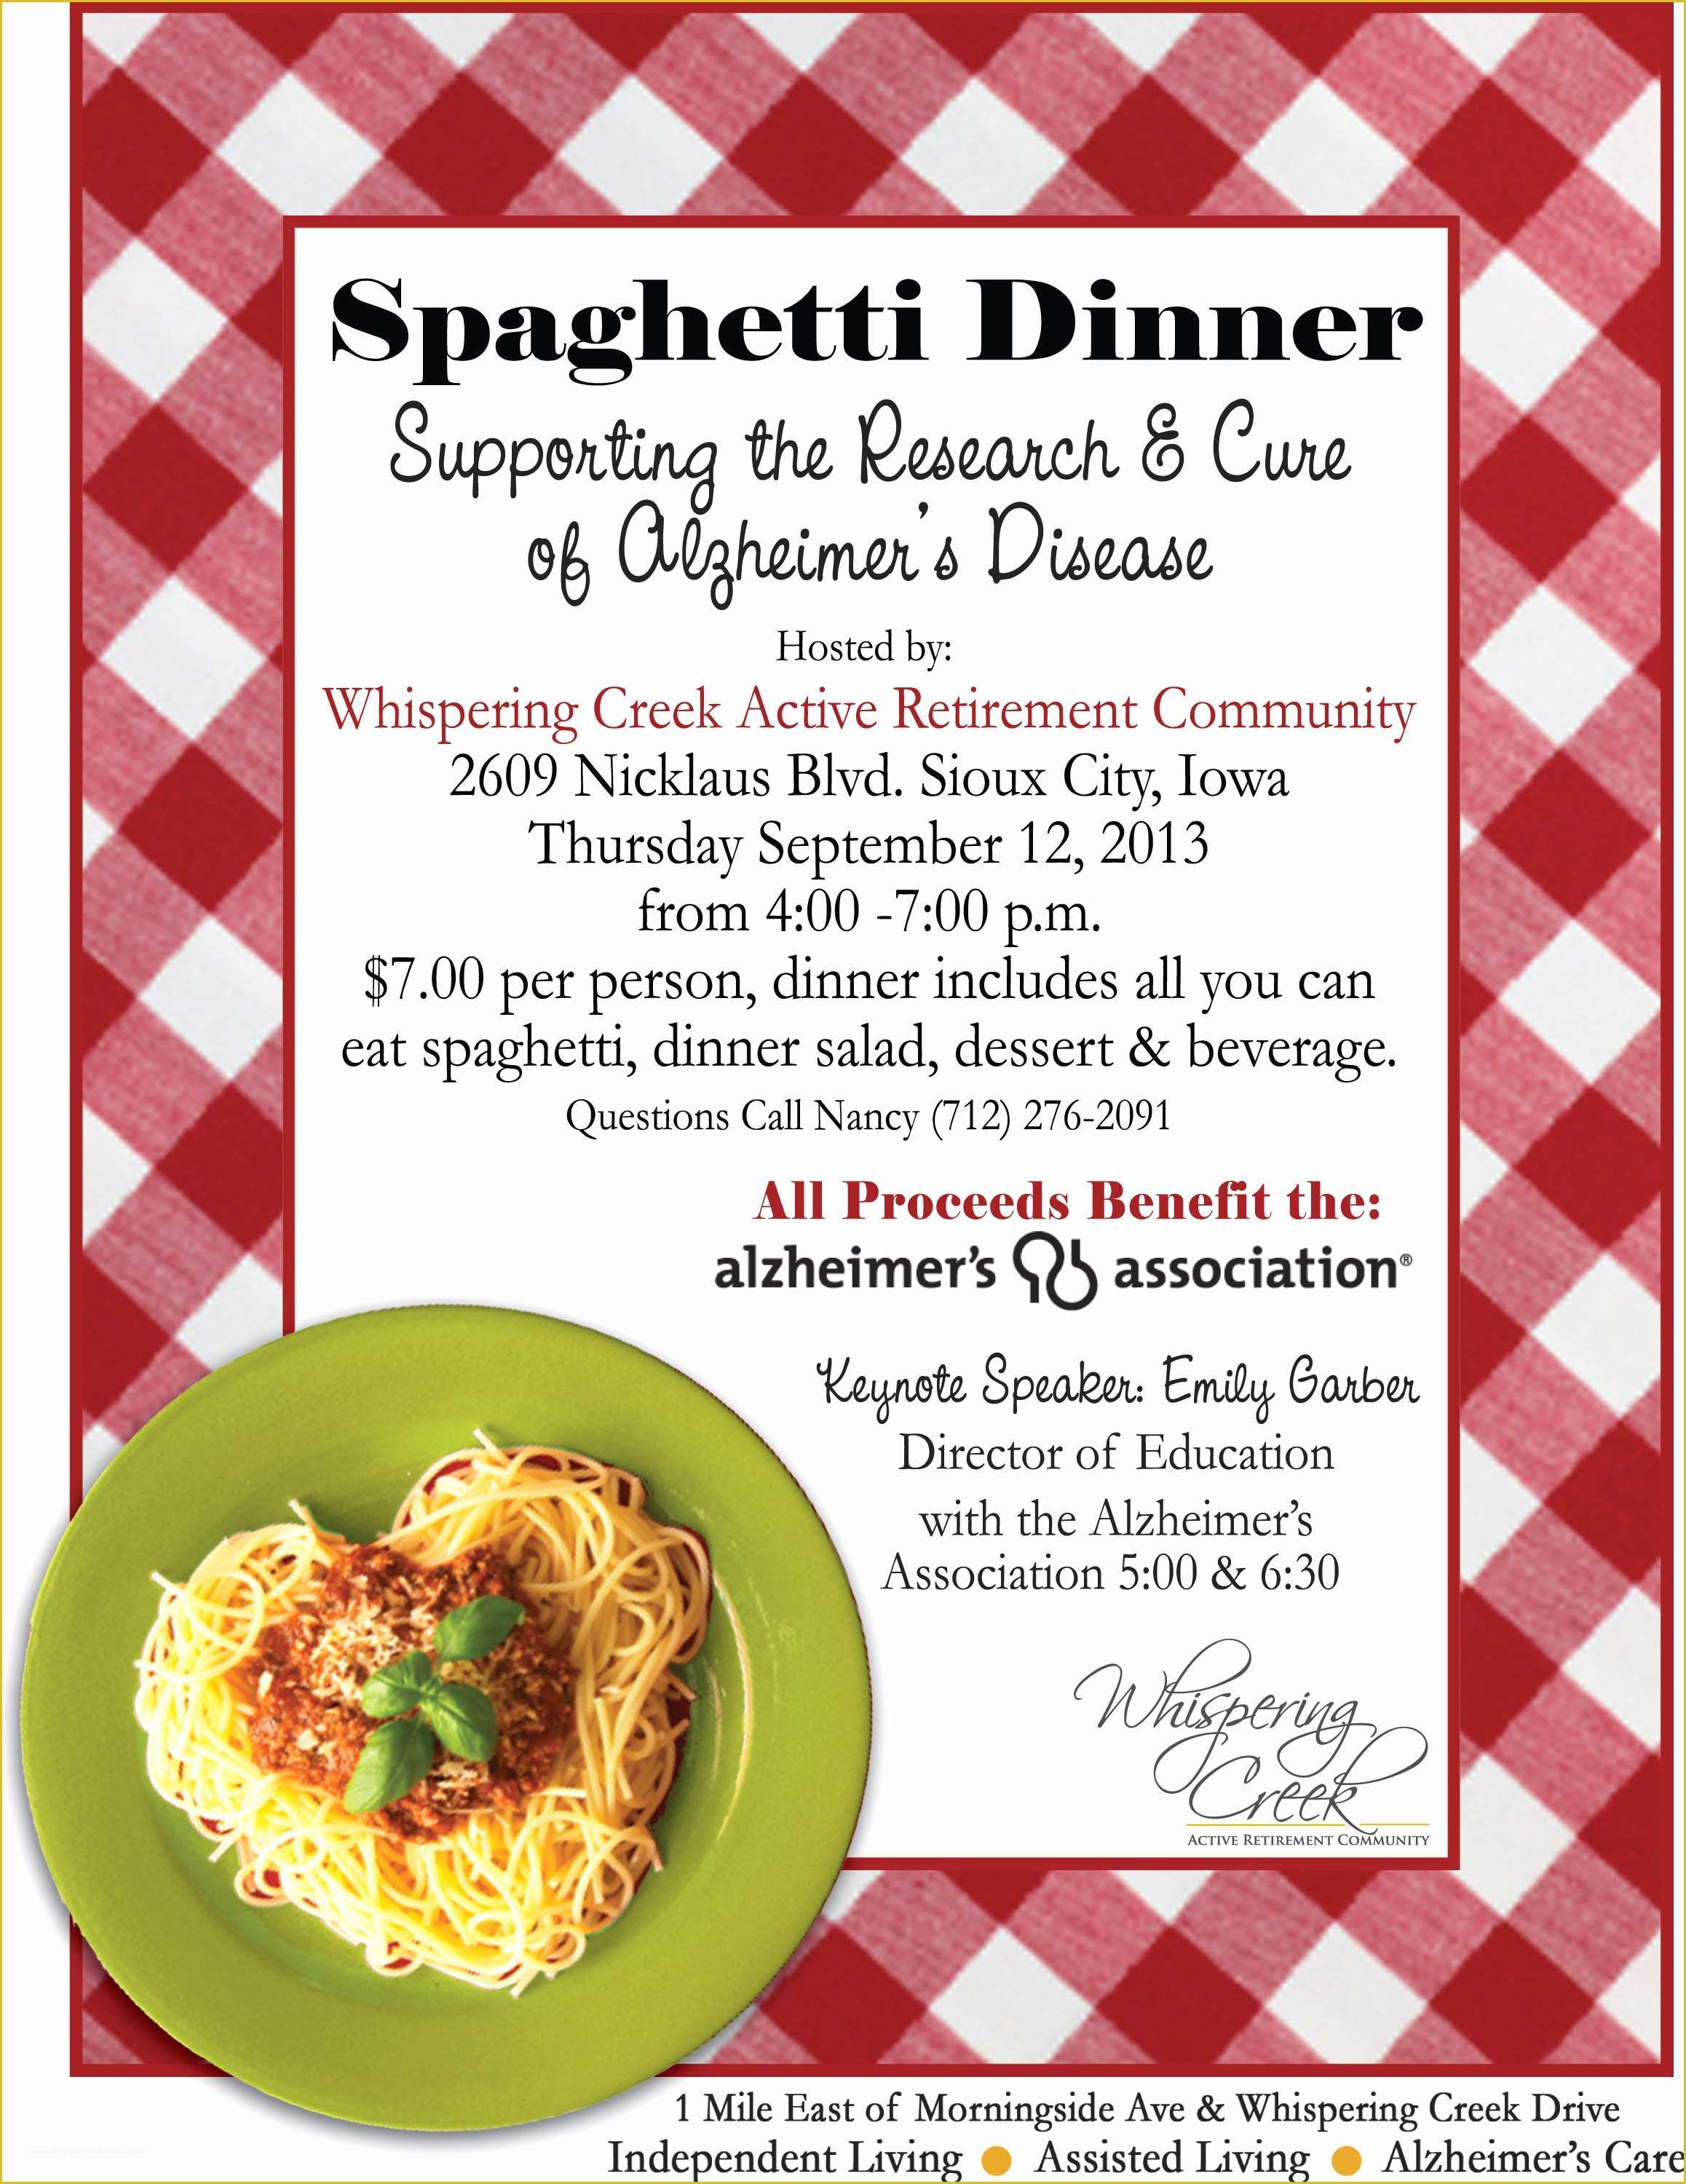 Free Dinner Sale Flyer Template Of Support the Research & Cure Of Alzheimer S Disease at the